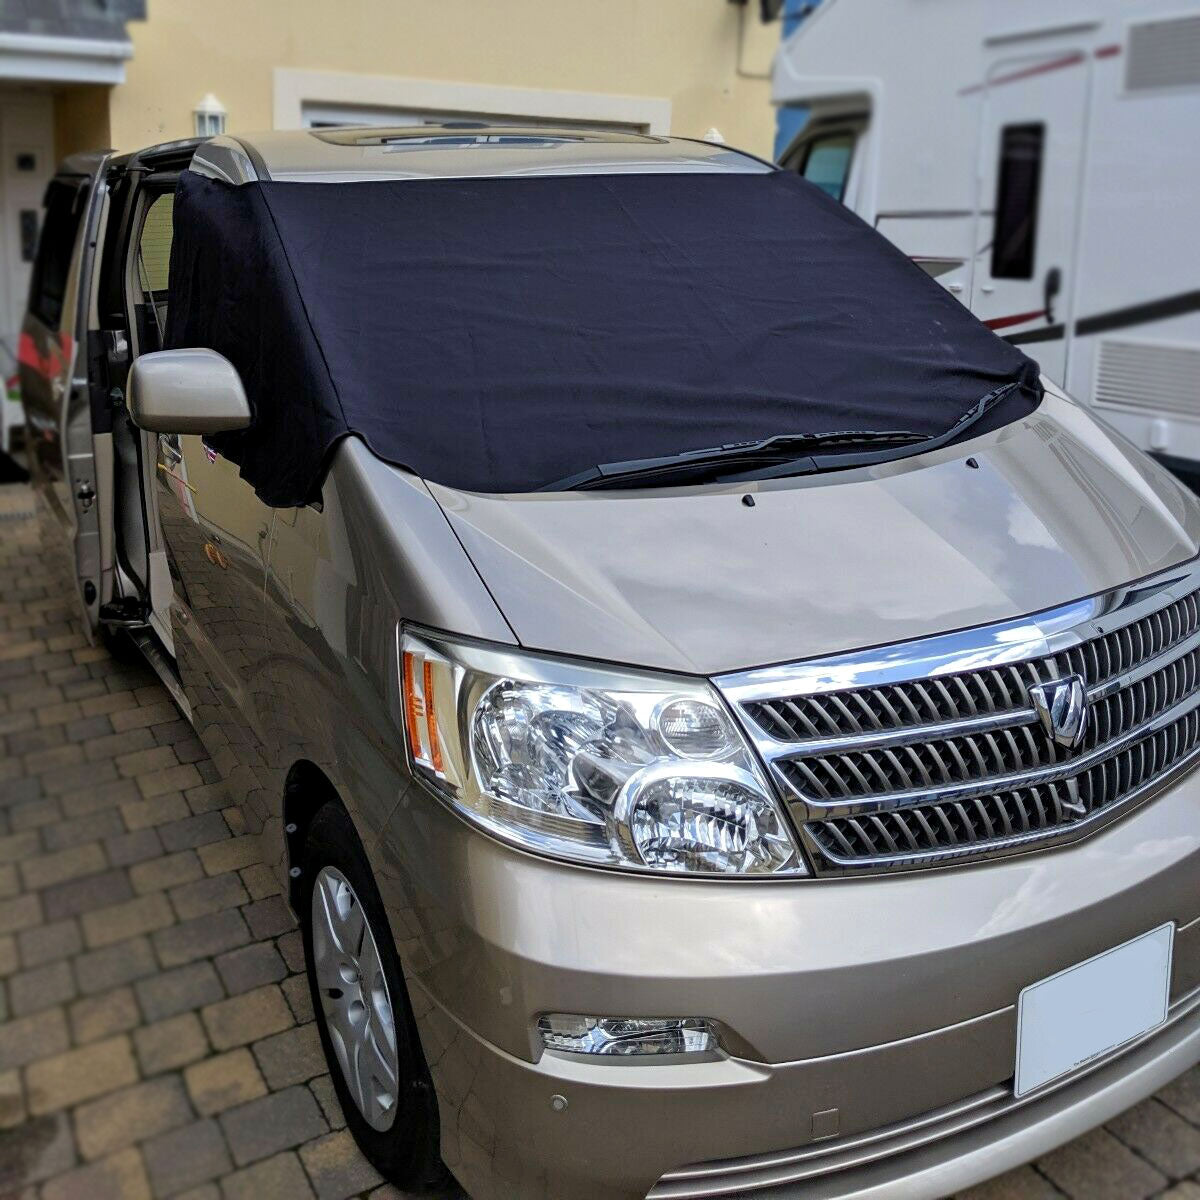 The Alphard Package